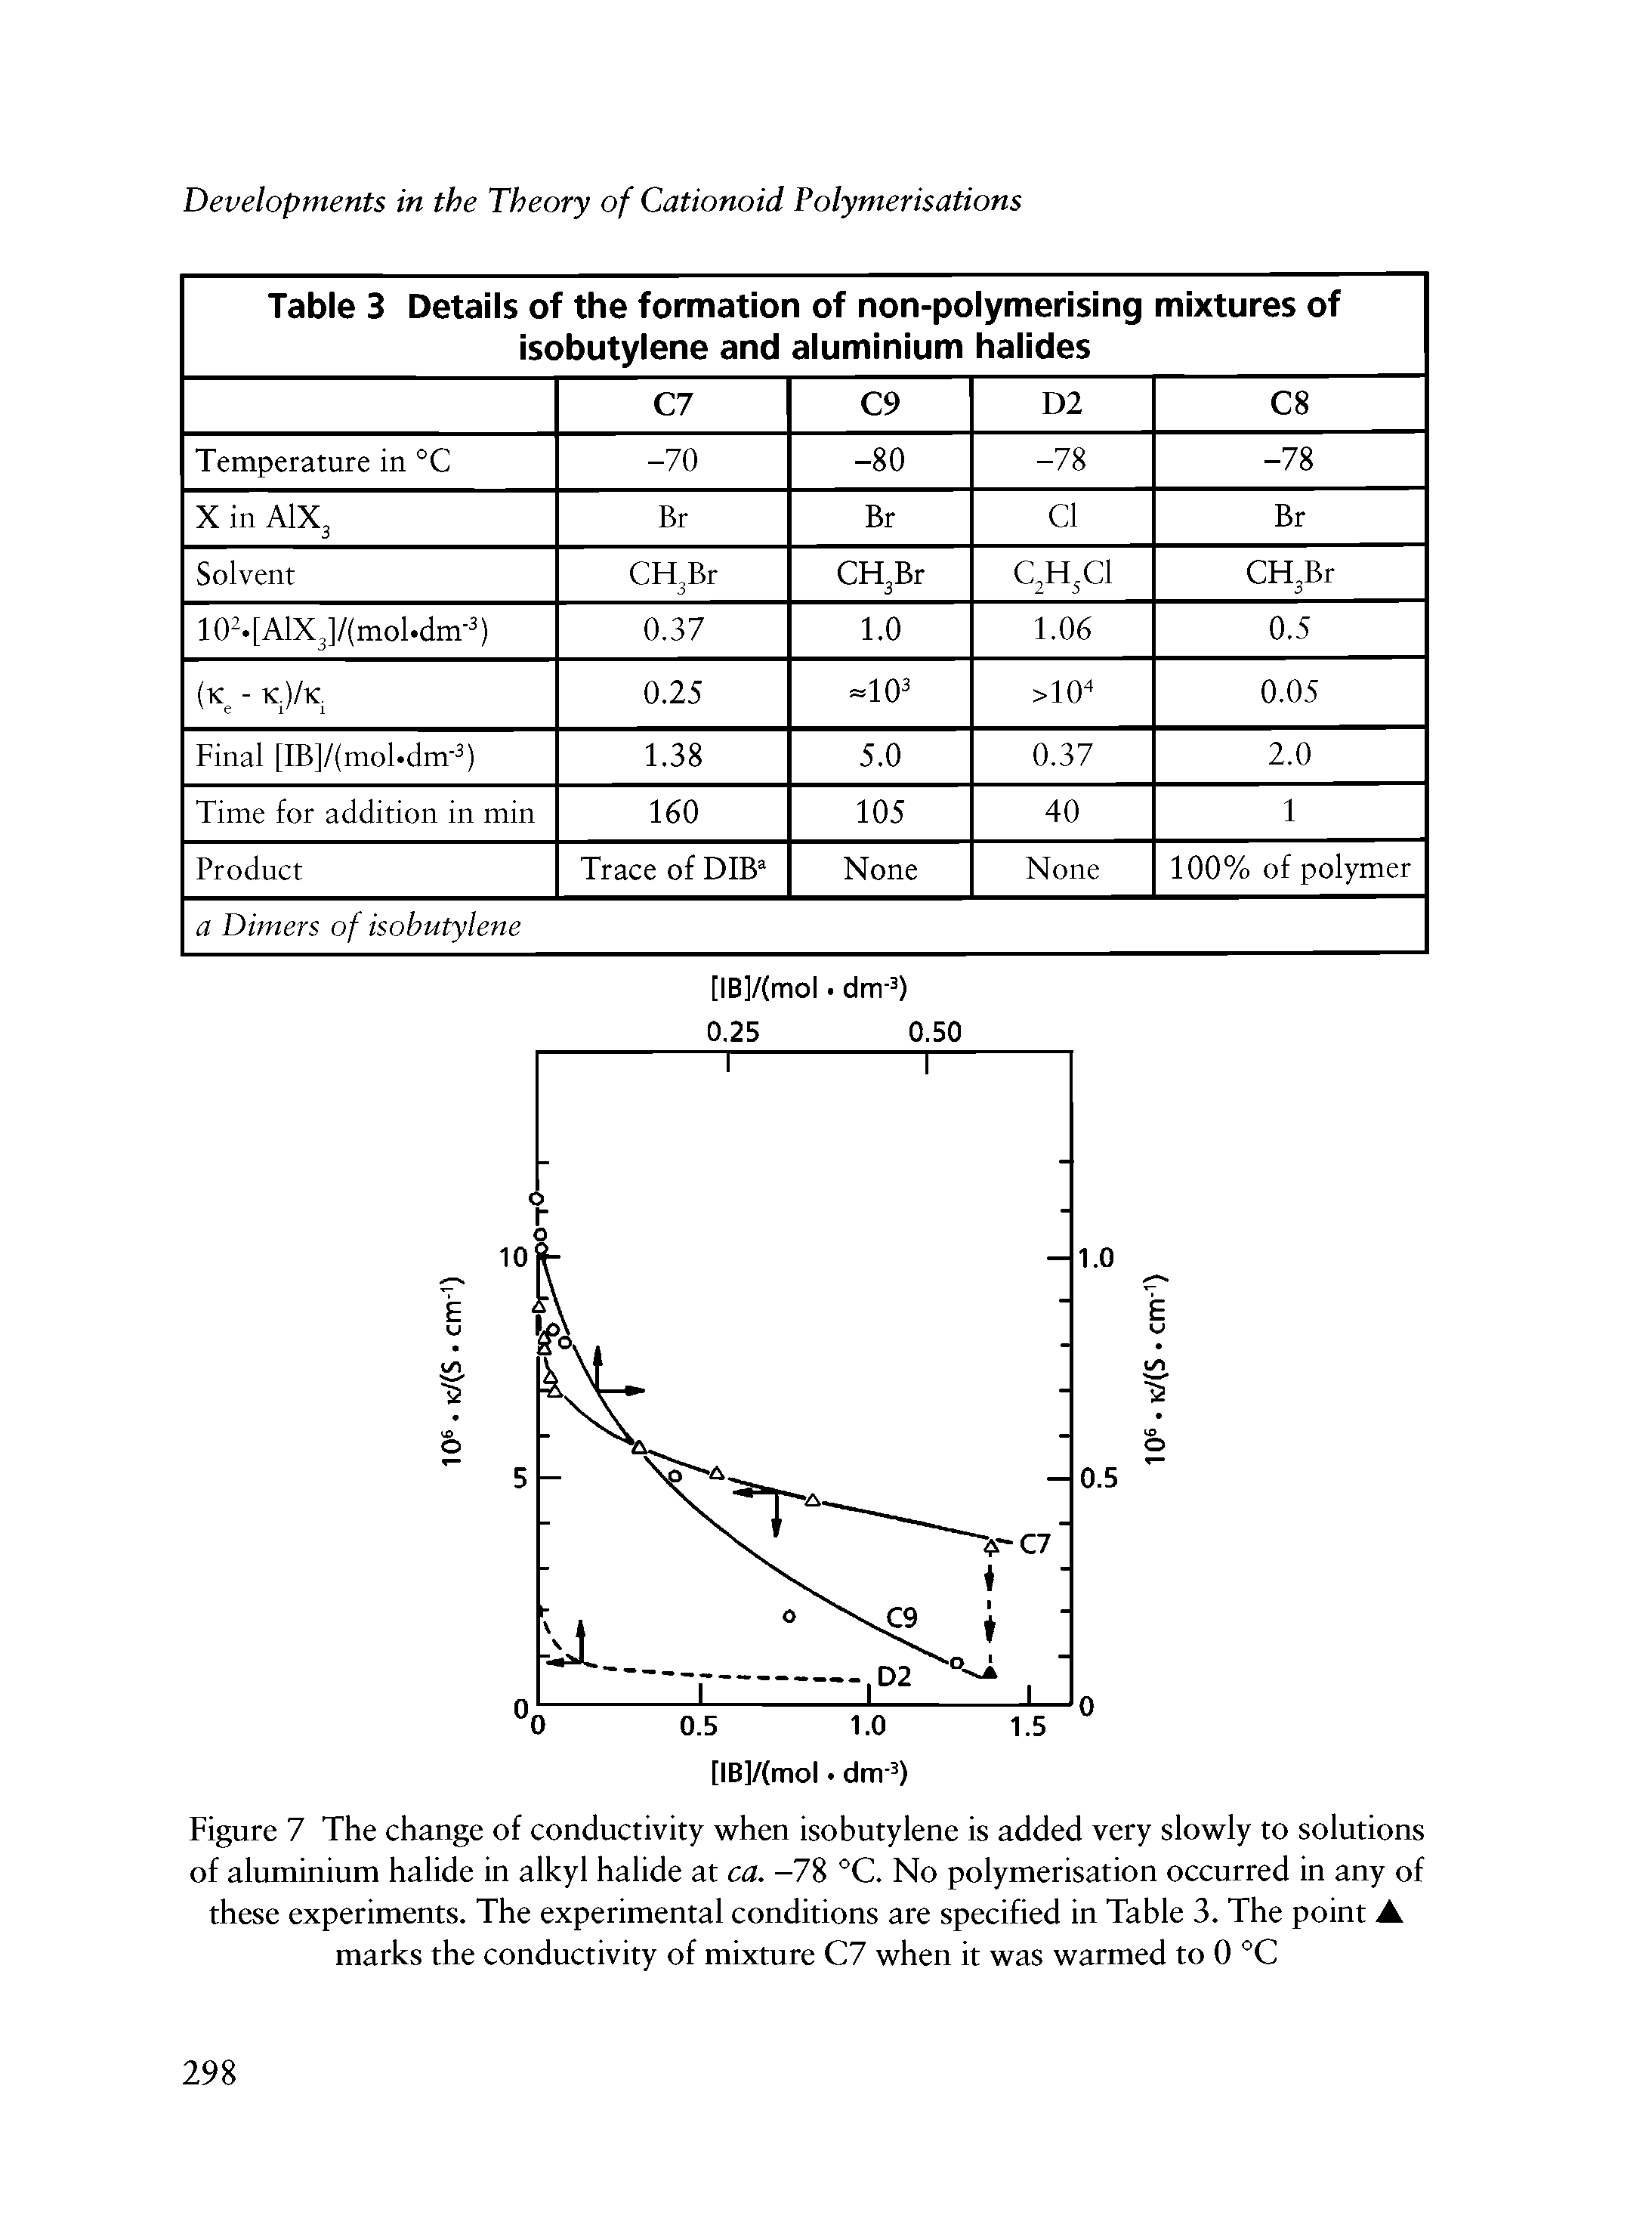 Figure 7 The change of conductivity when isobutylene is added very slowly to solutions of aluminium halide in alkyl halide at ca. -78 °C. No polymerisation occurred in any of these experiments. The experimental conditions are specified in Table 3. The point marks the conductivity of mixture C7 when it was warmed to 0 °C...